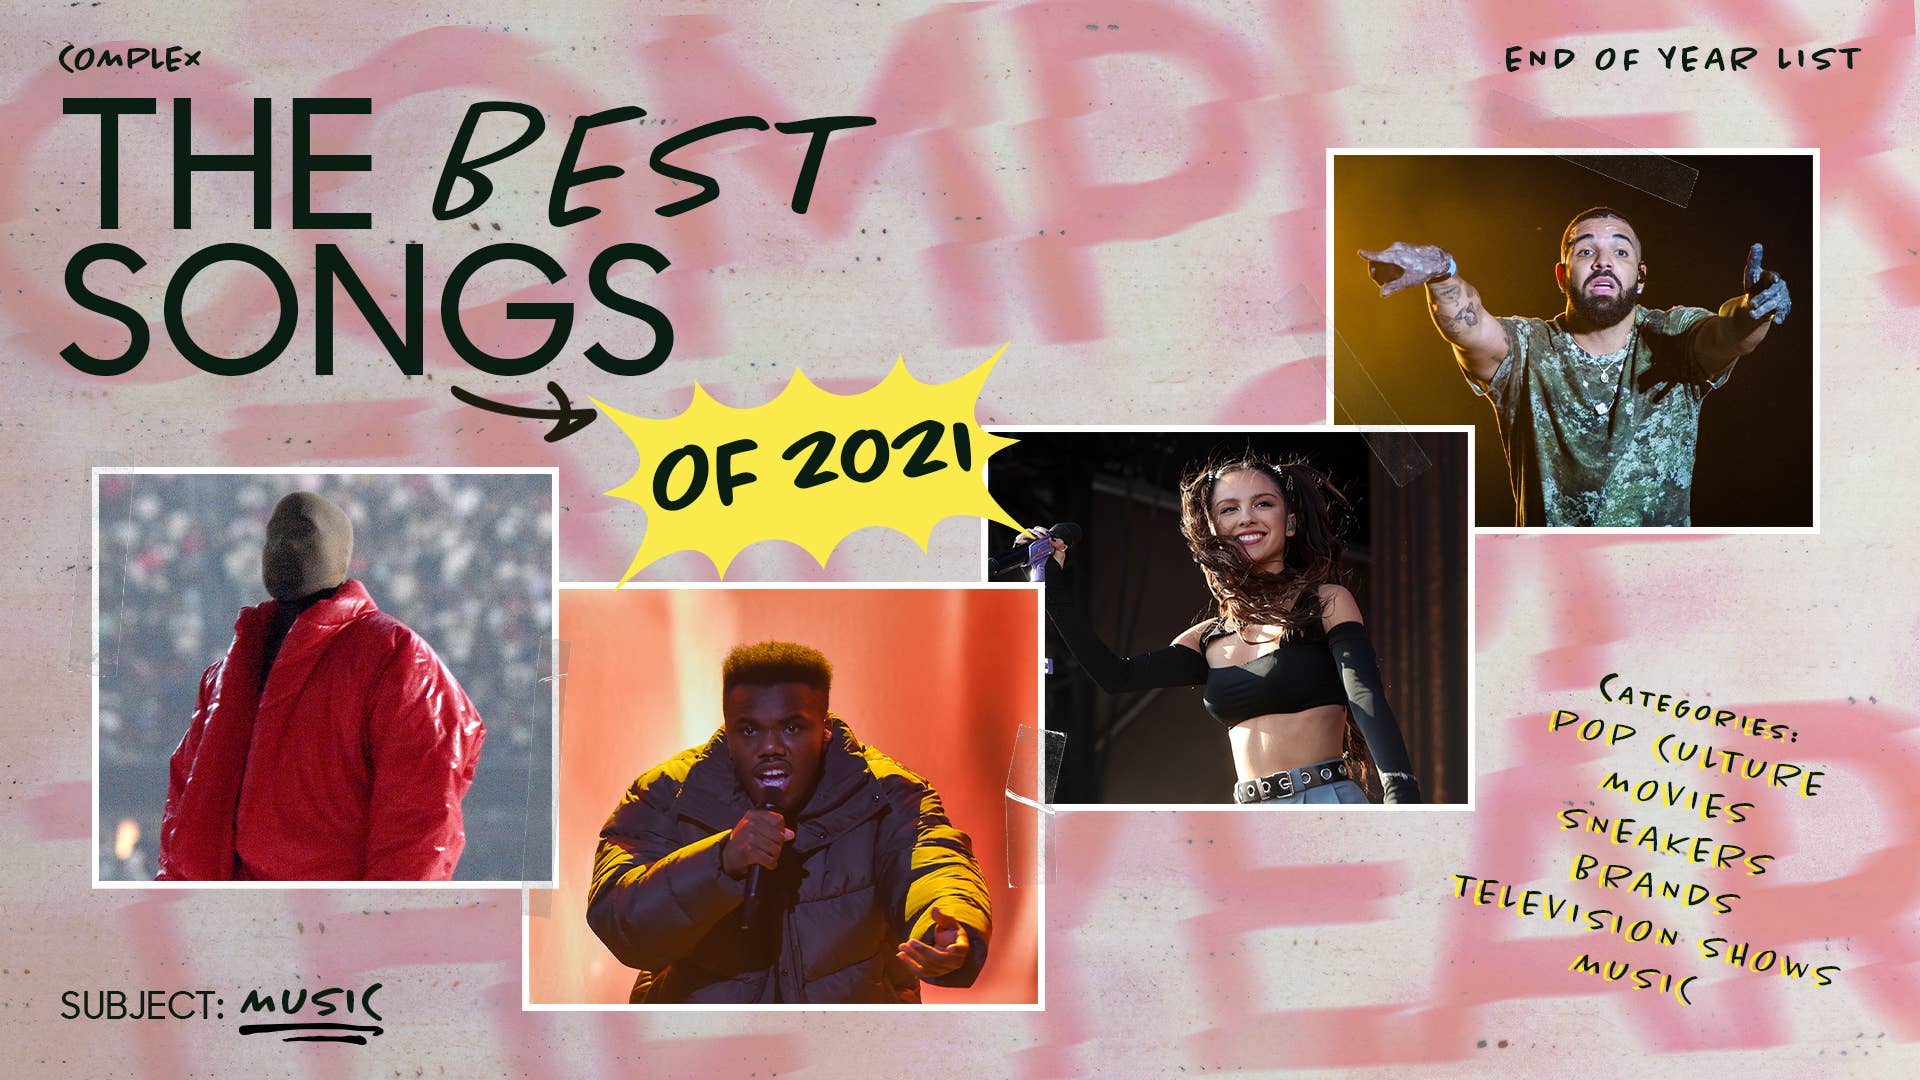 Complex's 50 Best Songs of 2021